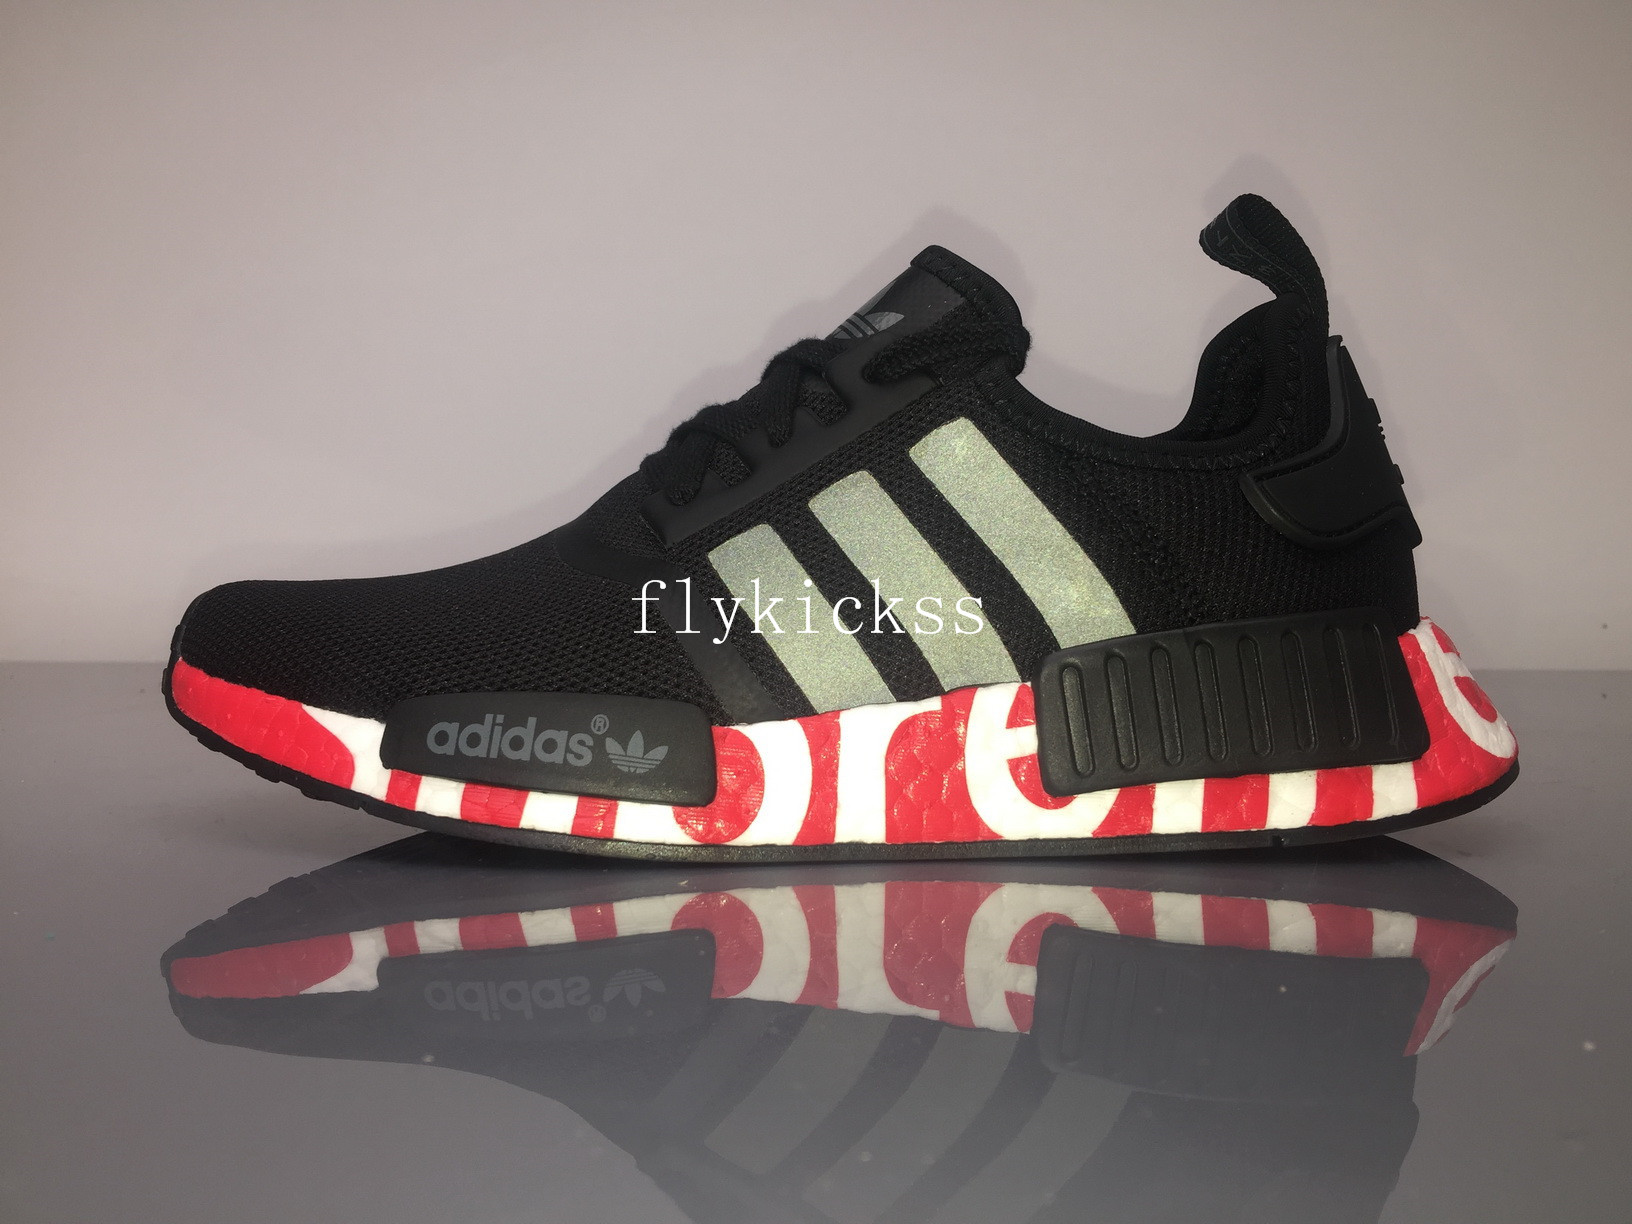 NMD R1 Khaki Mens Shoes in 2020 Adidas nmd Pinterest